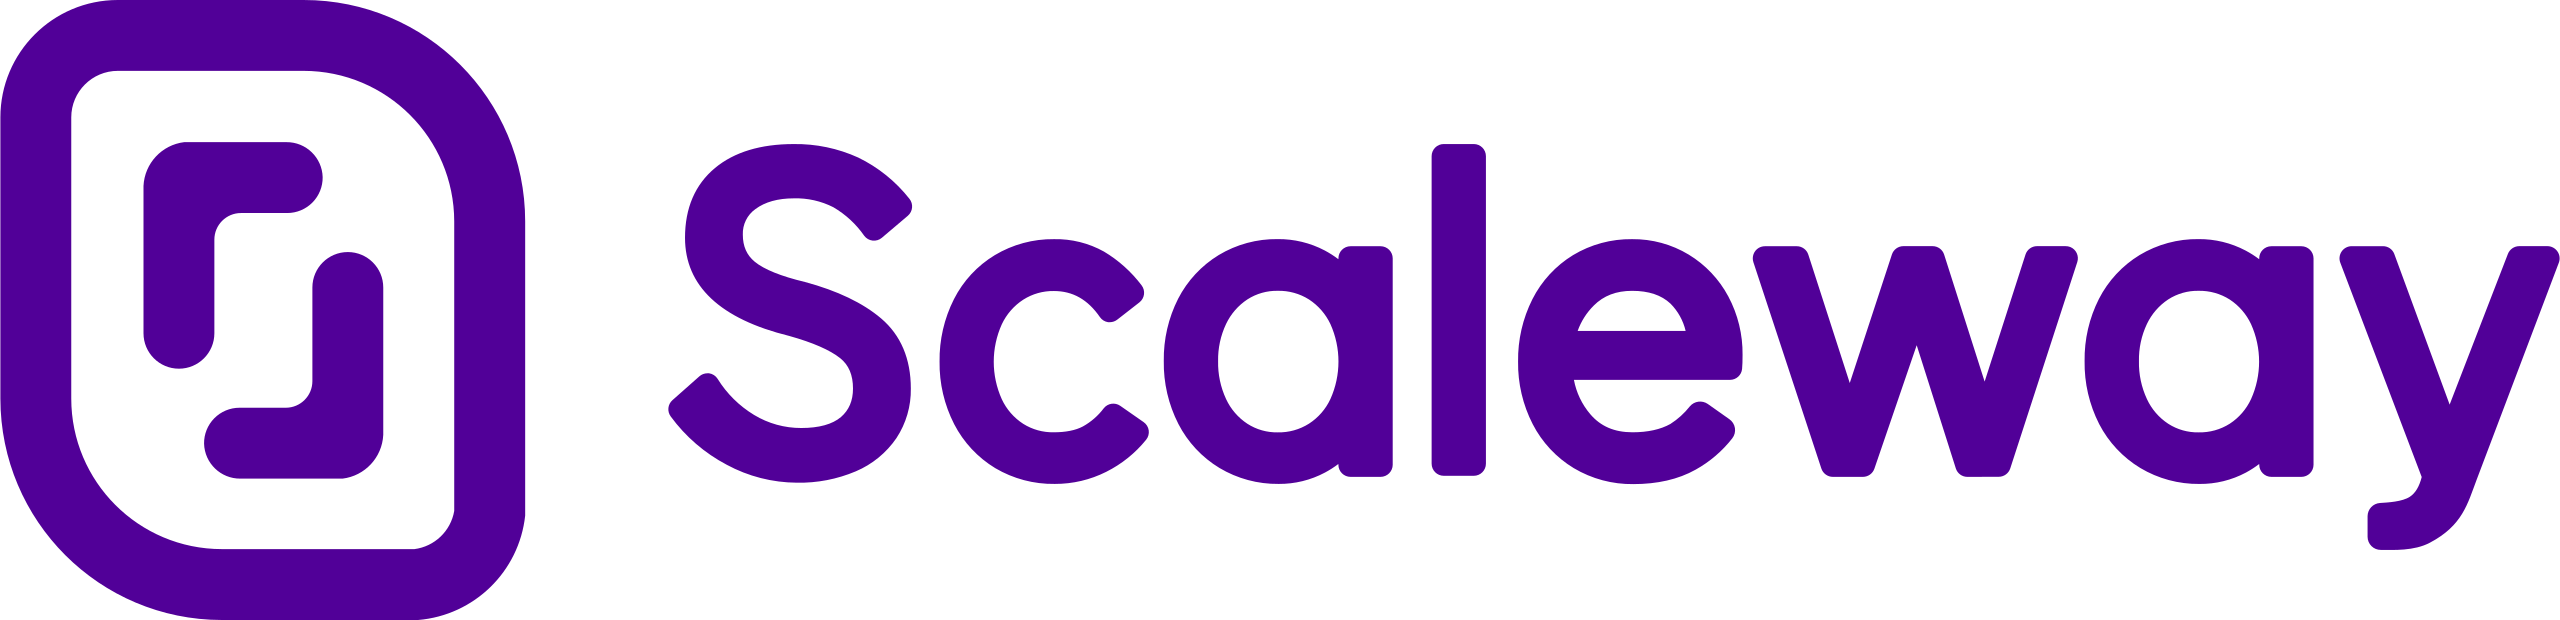 2560px-Scaleway_logo_2018.svg-5727bc.png